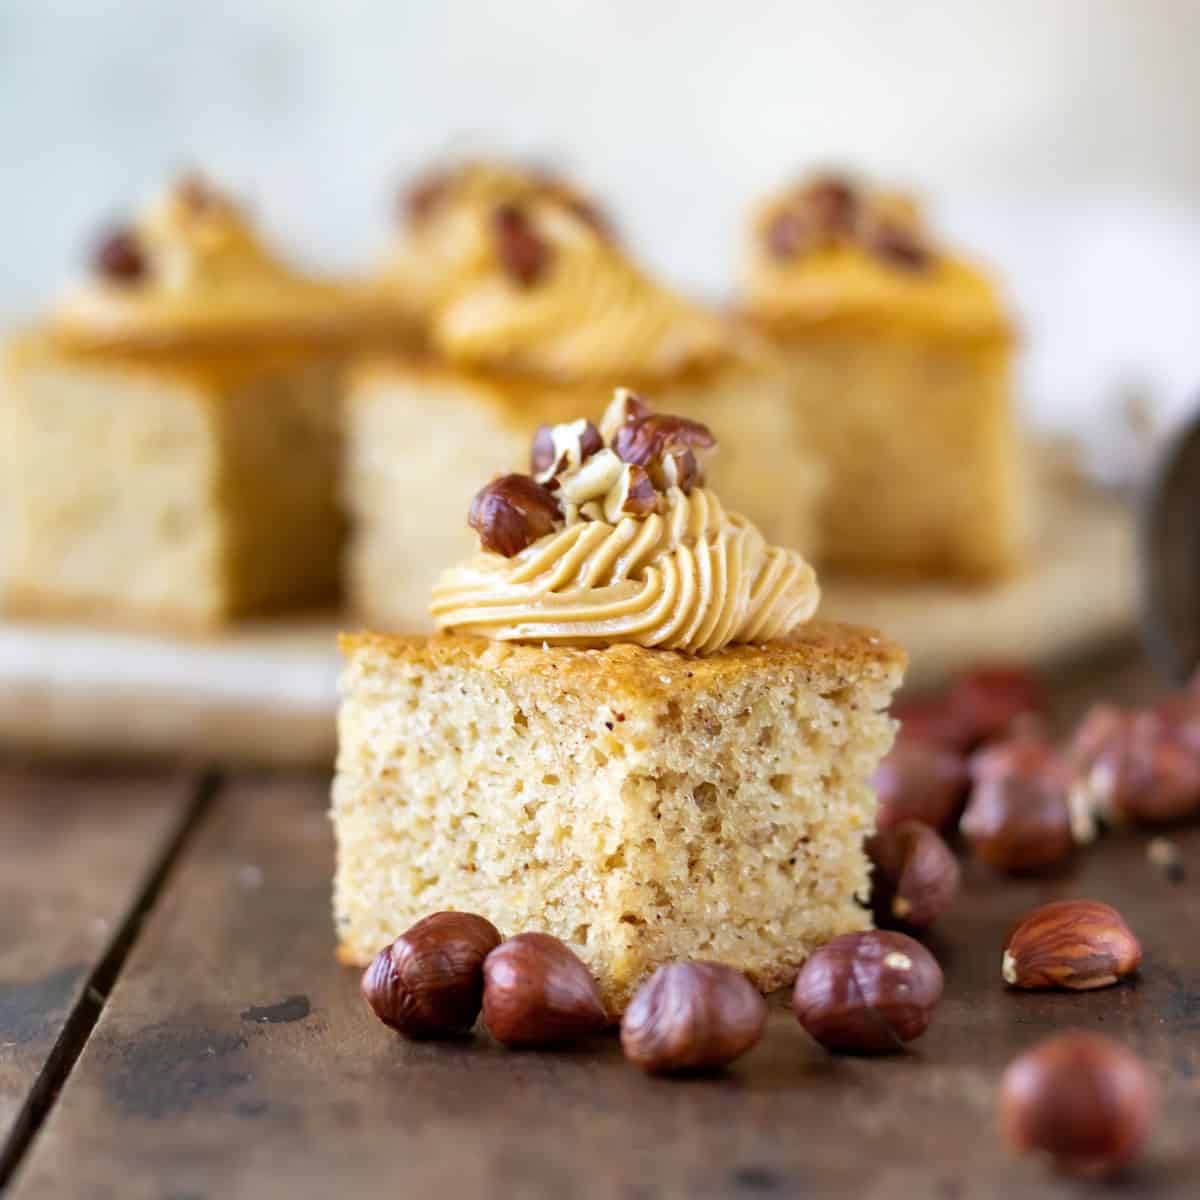 Slice of cake topped with frosting and hazelnuts.